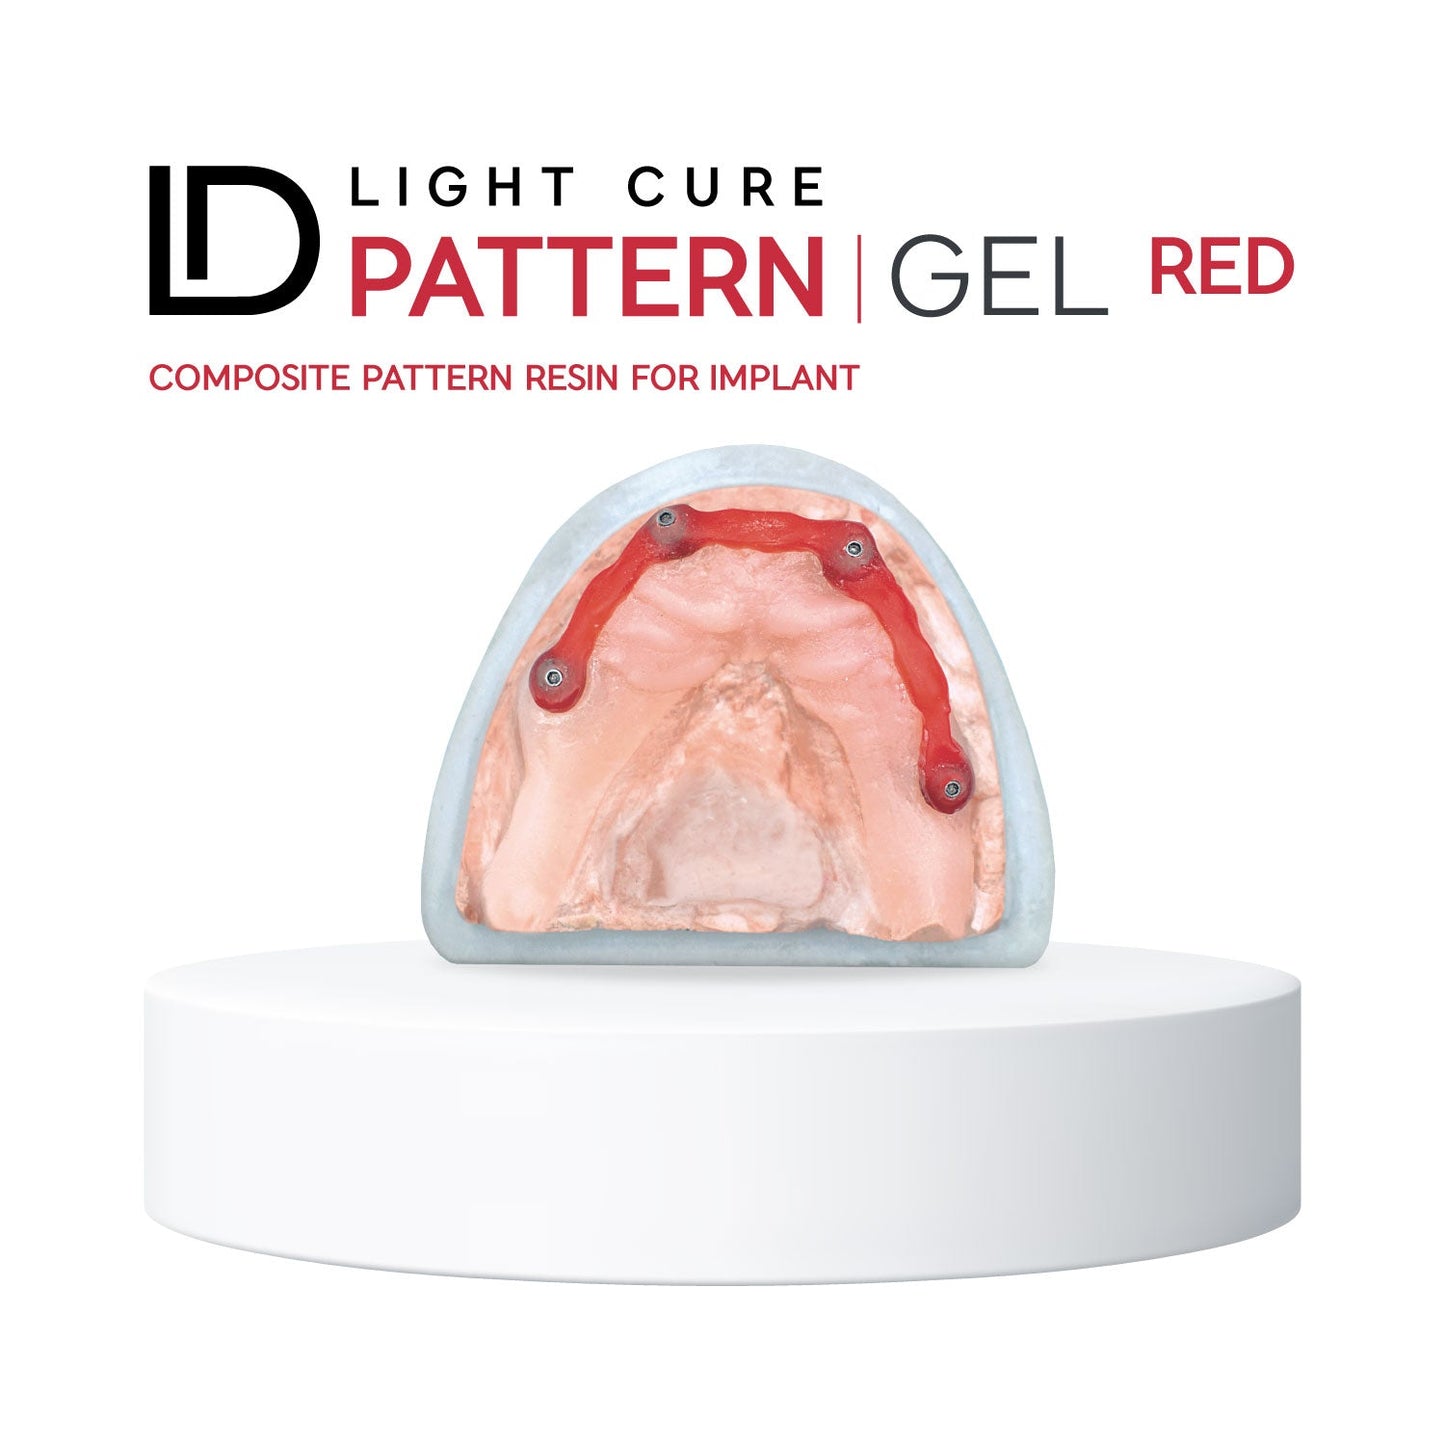 ID PATTERN GEL RED: Precise Patterns for Dentists & Technicians - Dentcore